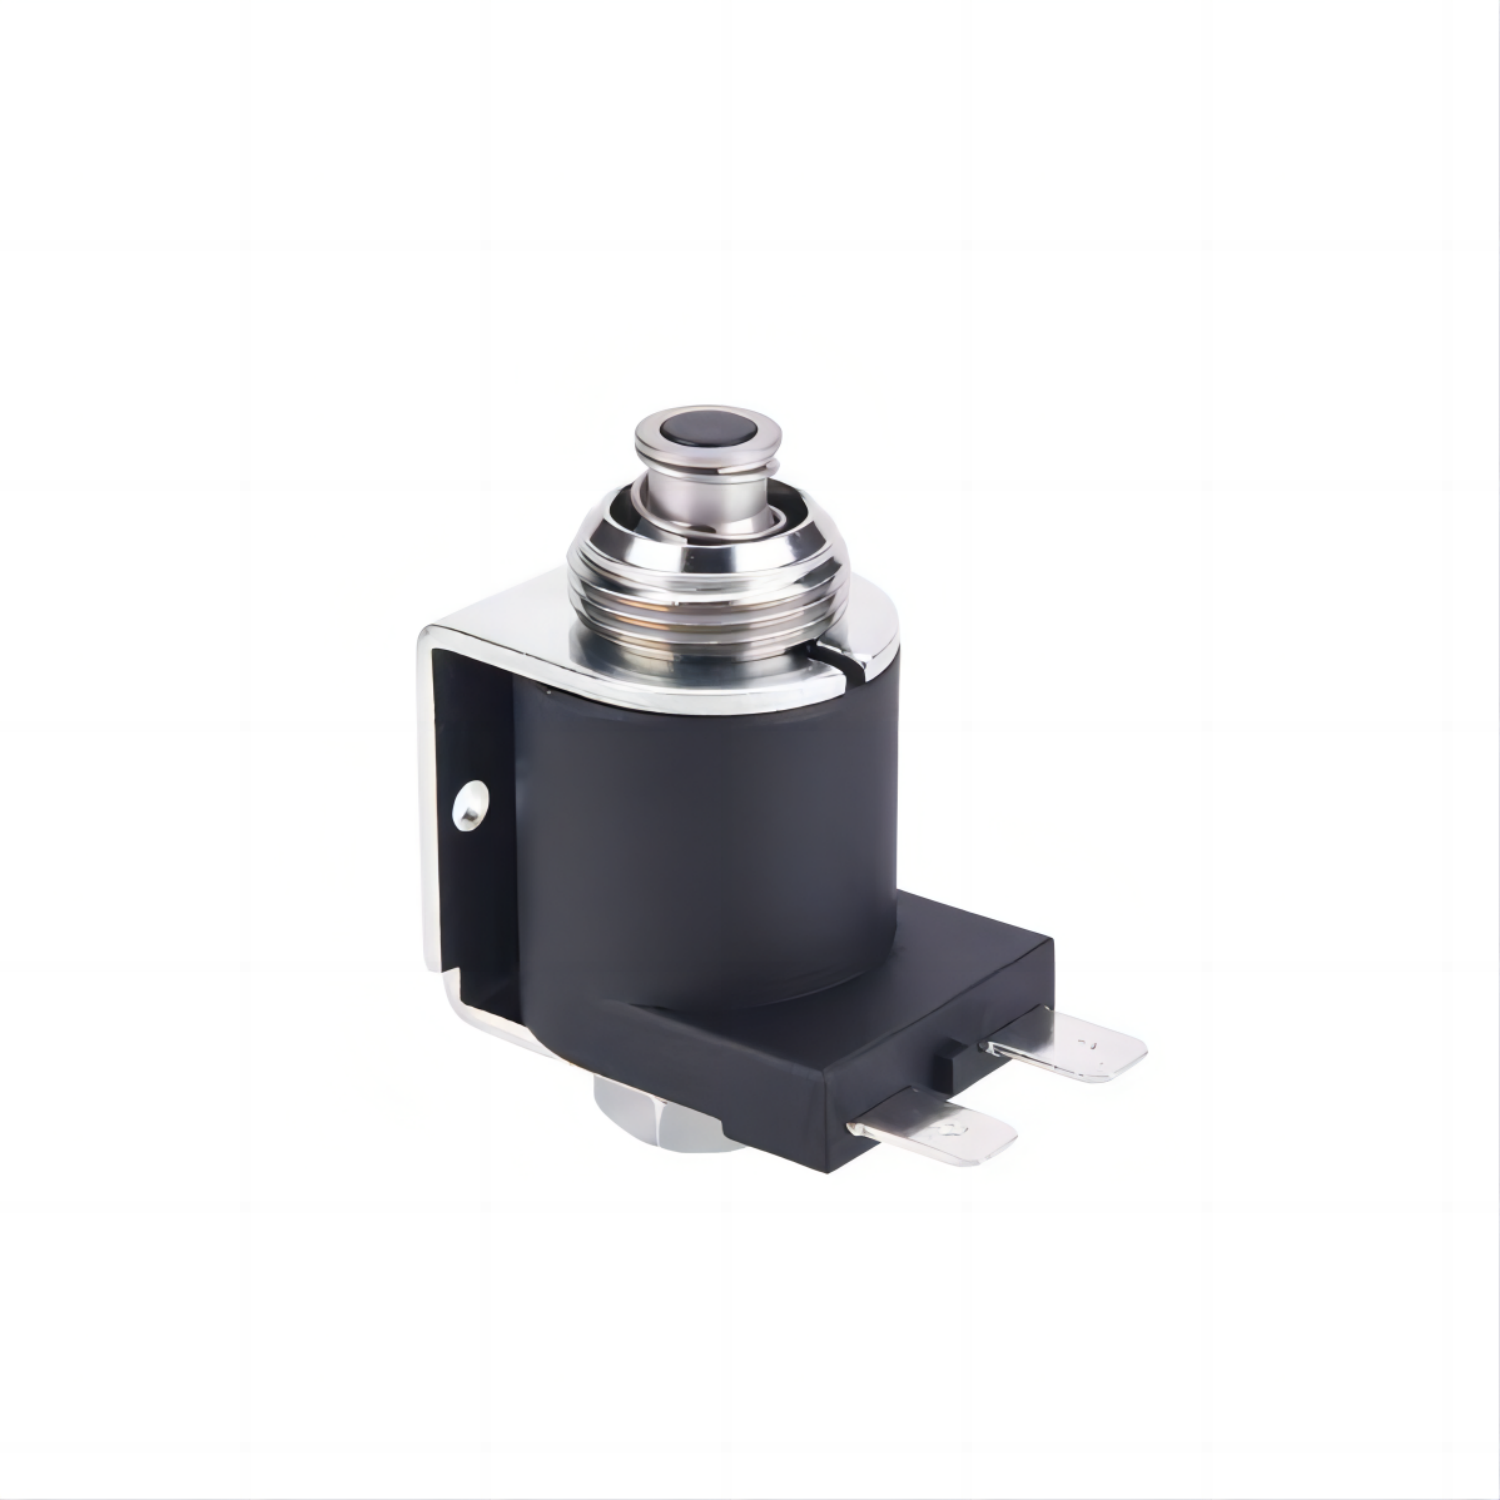 Suitable for direct acting normally closed 2-way oxygen solenoid valve